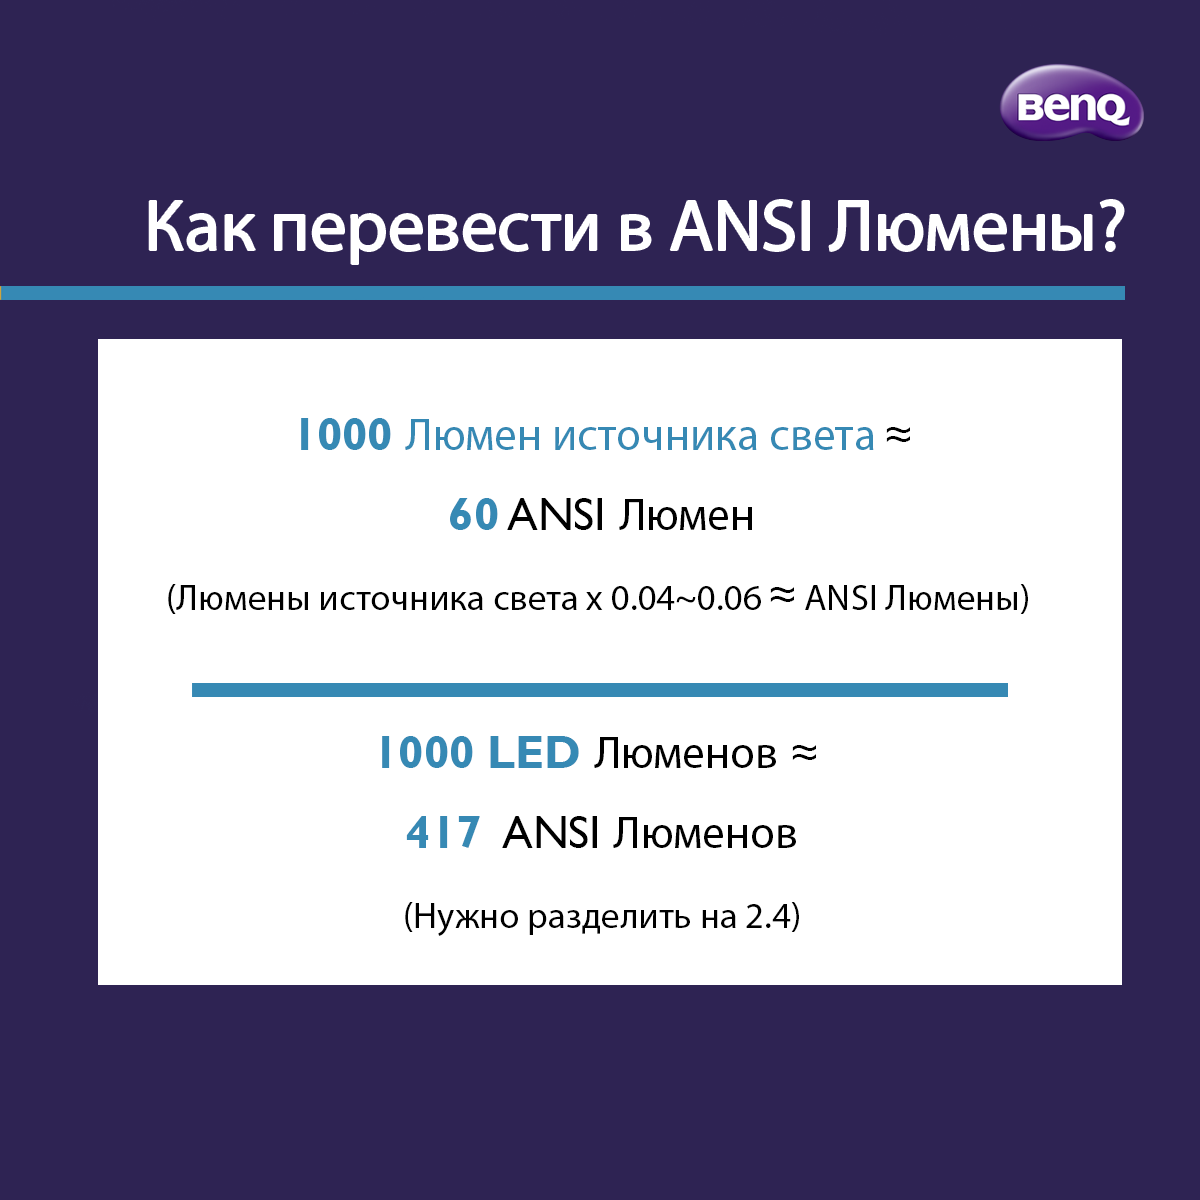 how to convert to ansi lumens